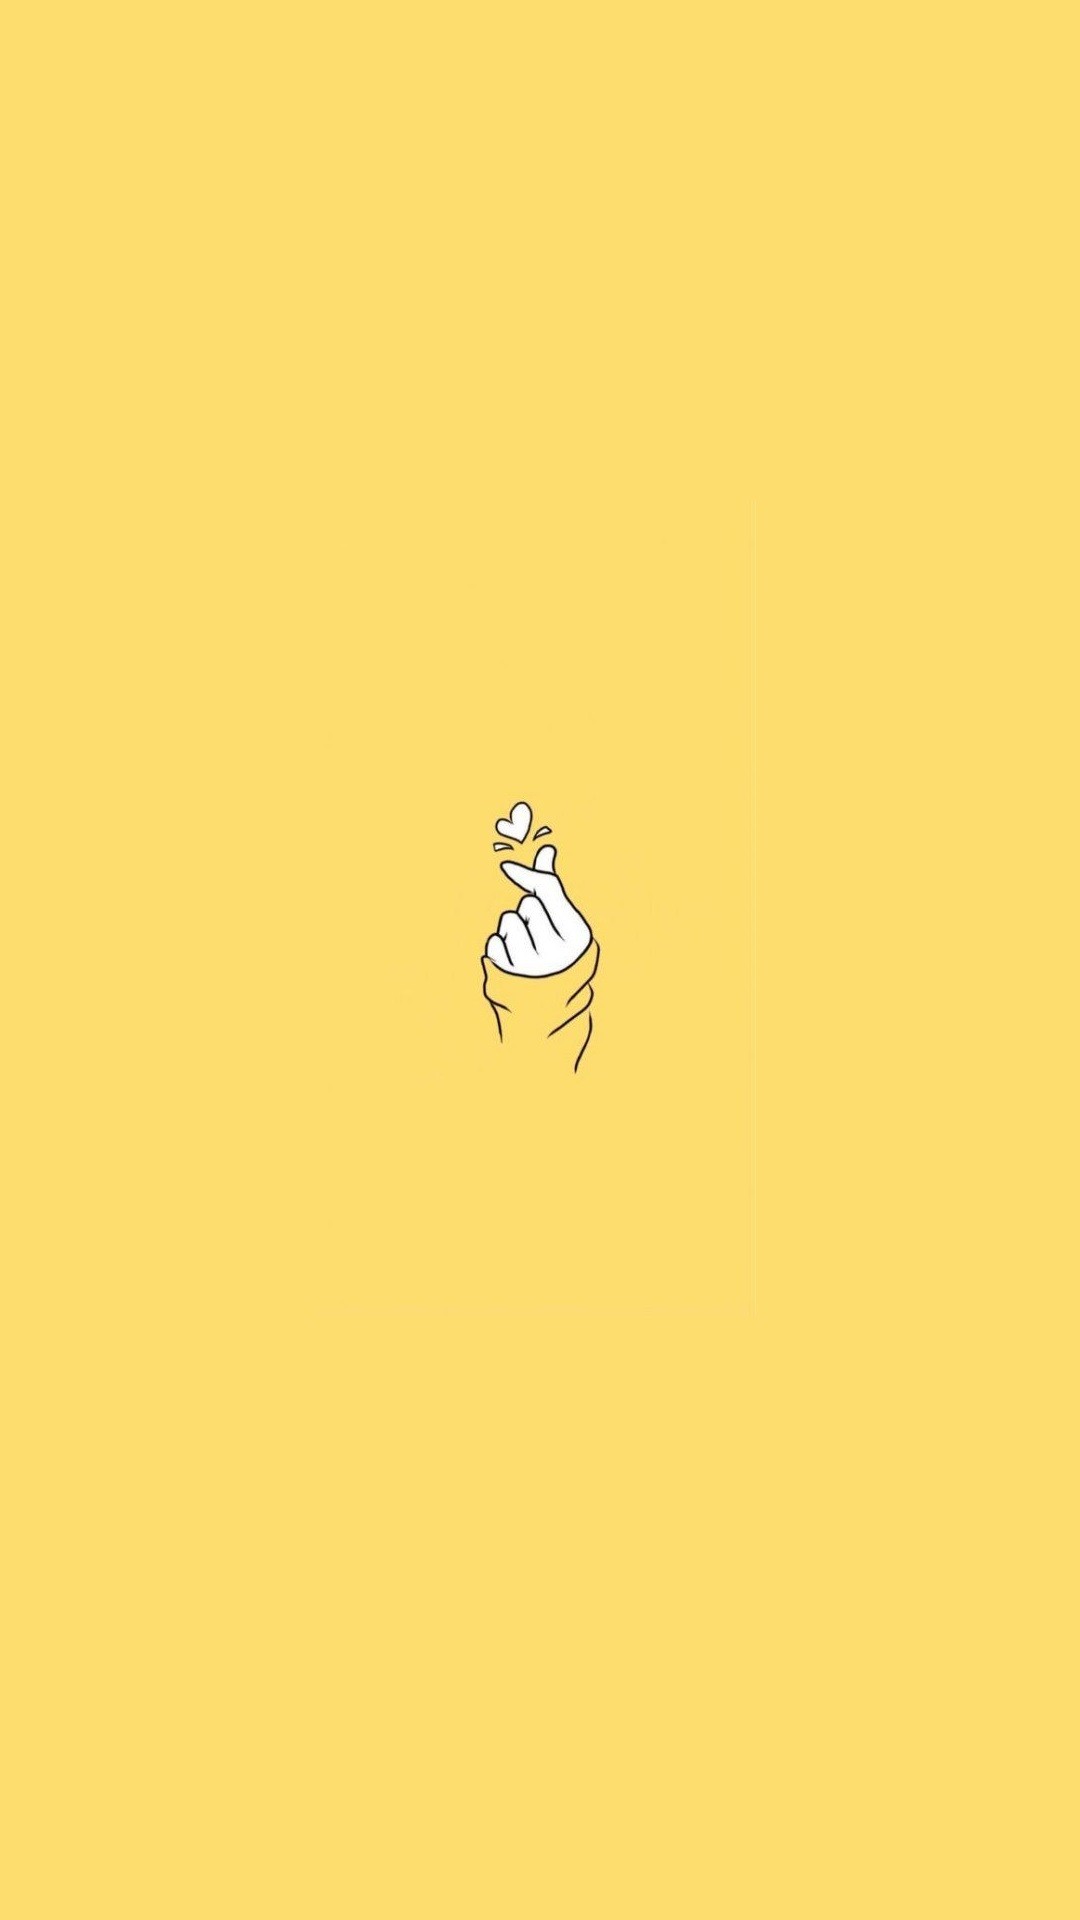 Yellow Aesthetic iPhone Wallpapers with high-resolution 1080x1920 pixel. You can use this wallpaper for your iPhone 5, 6, 7, 8, X, XS, XR backgrounds, Mobile Screensaver, or iPad Lock Screen